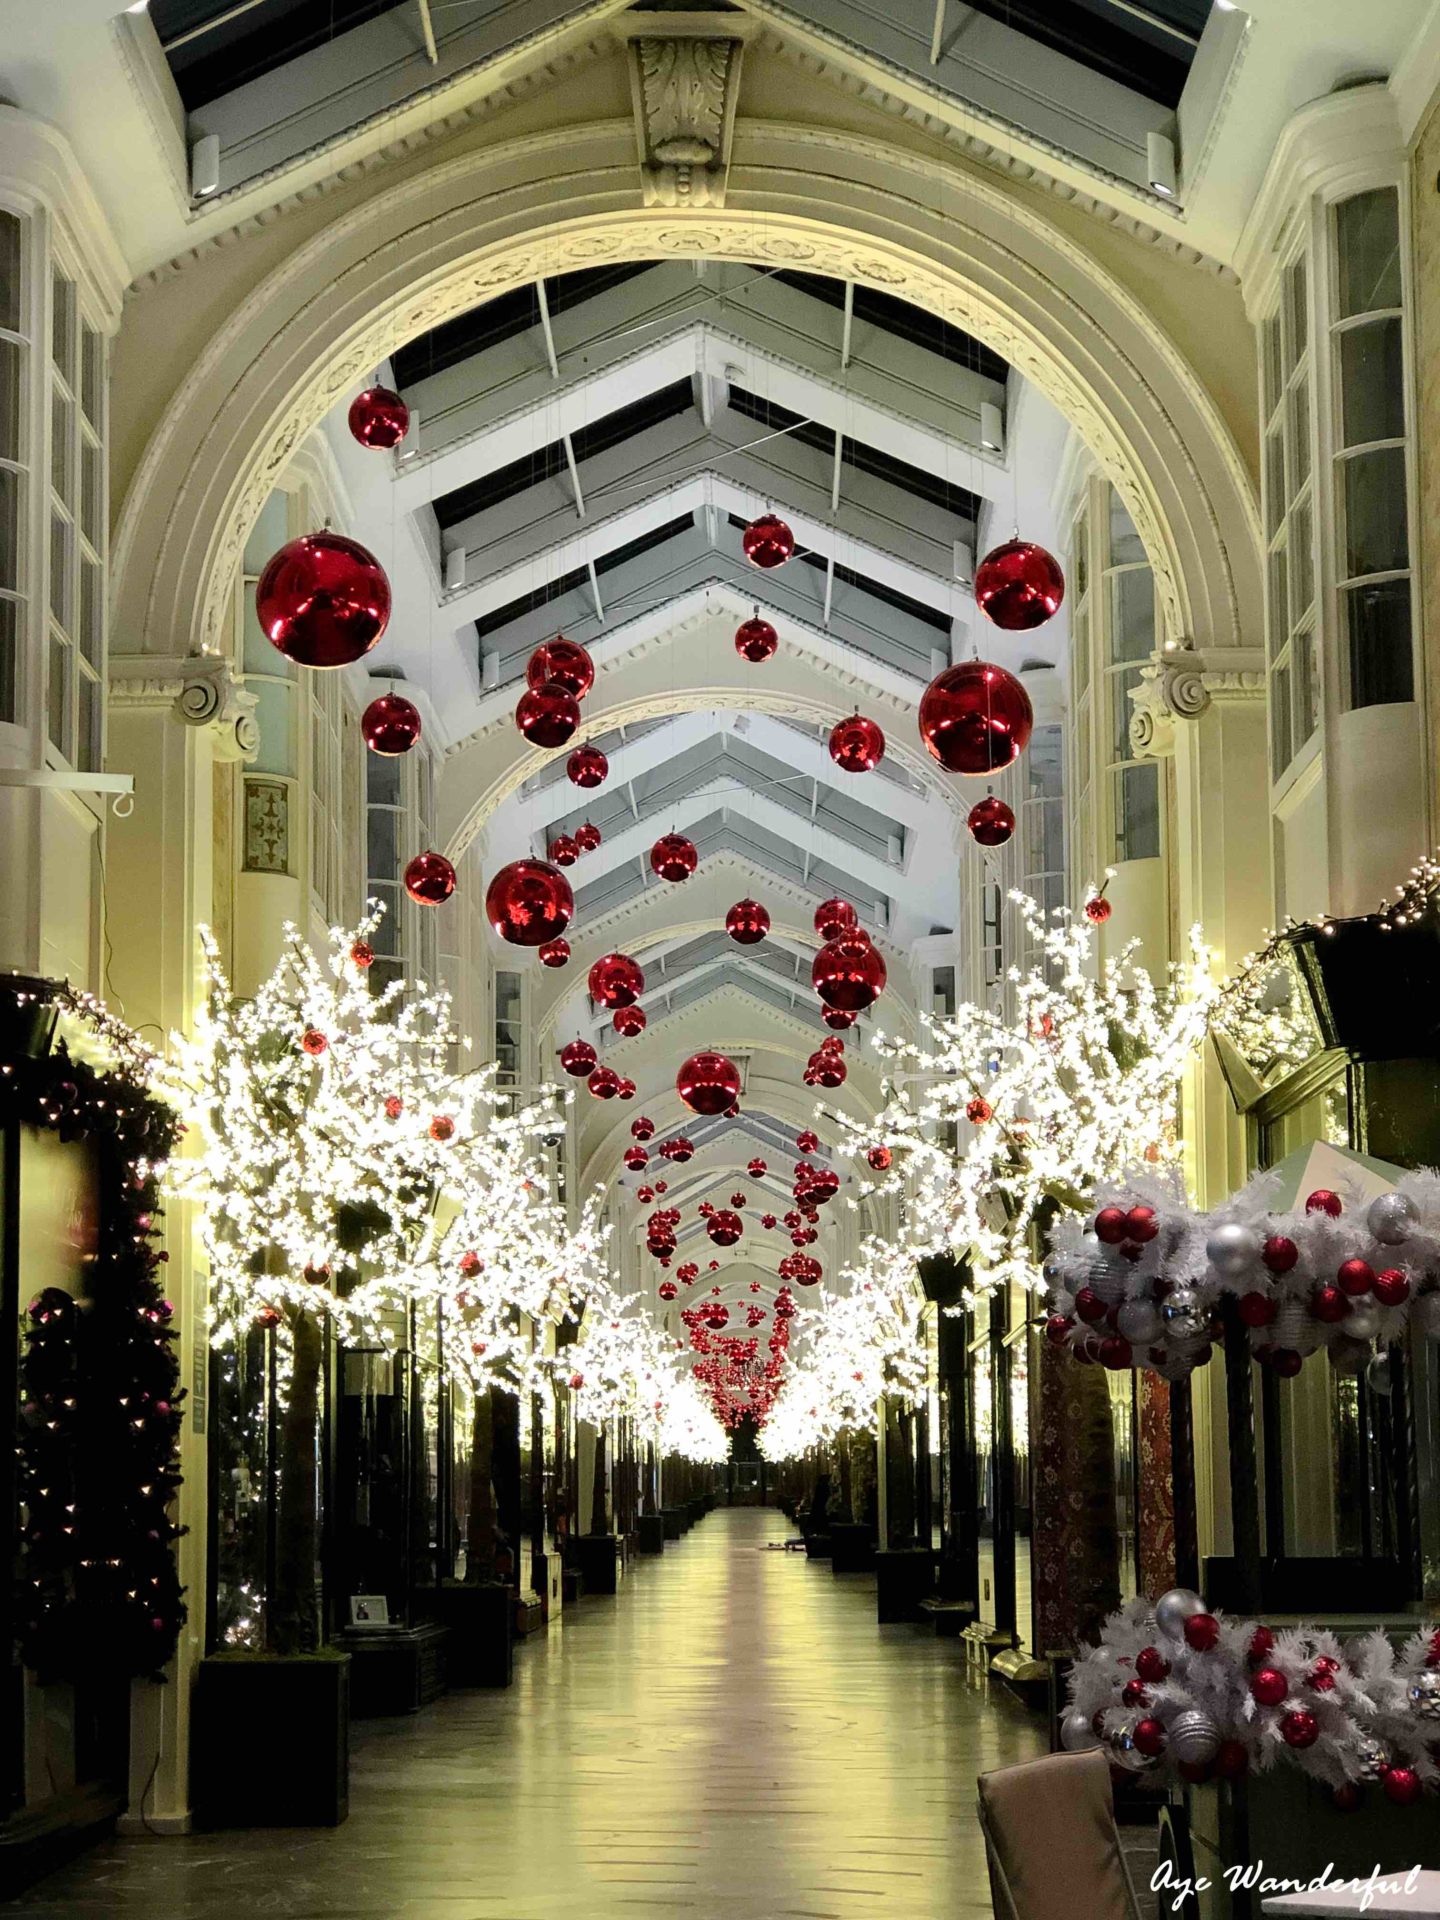 A Photo Guide to the Best Christmas Decorations in London  Aye Wanderful